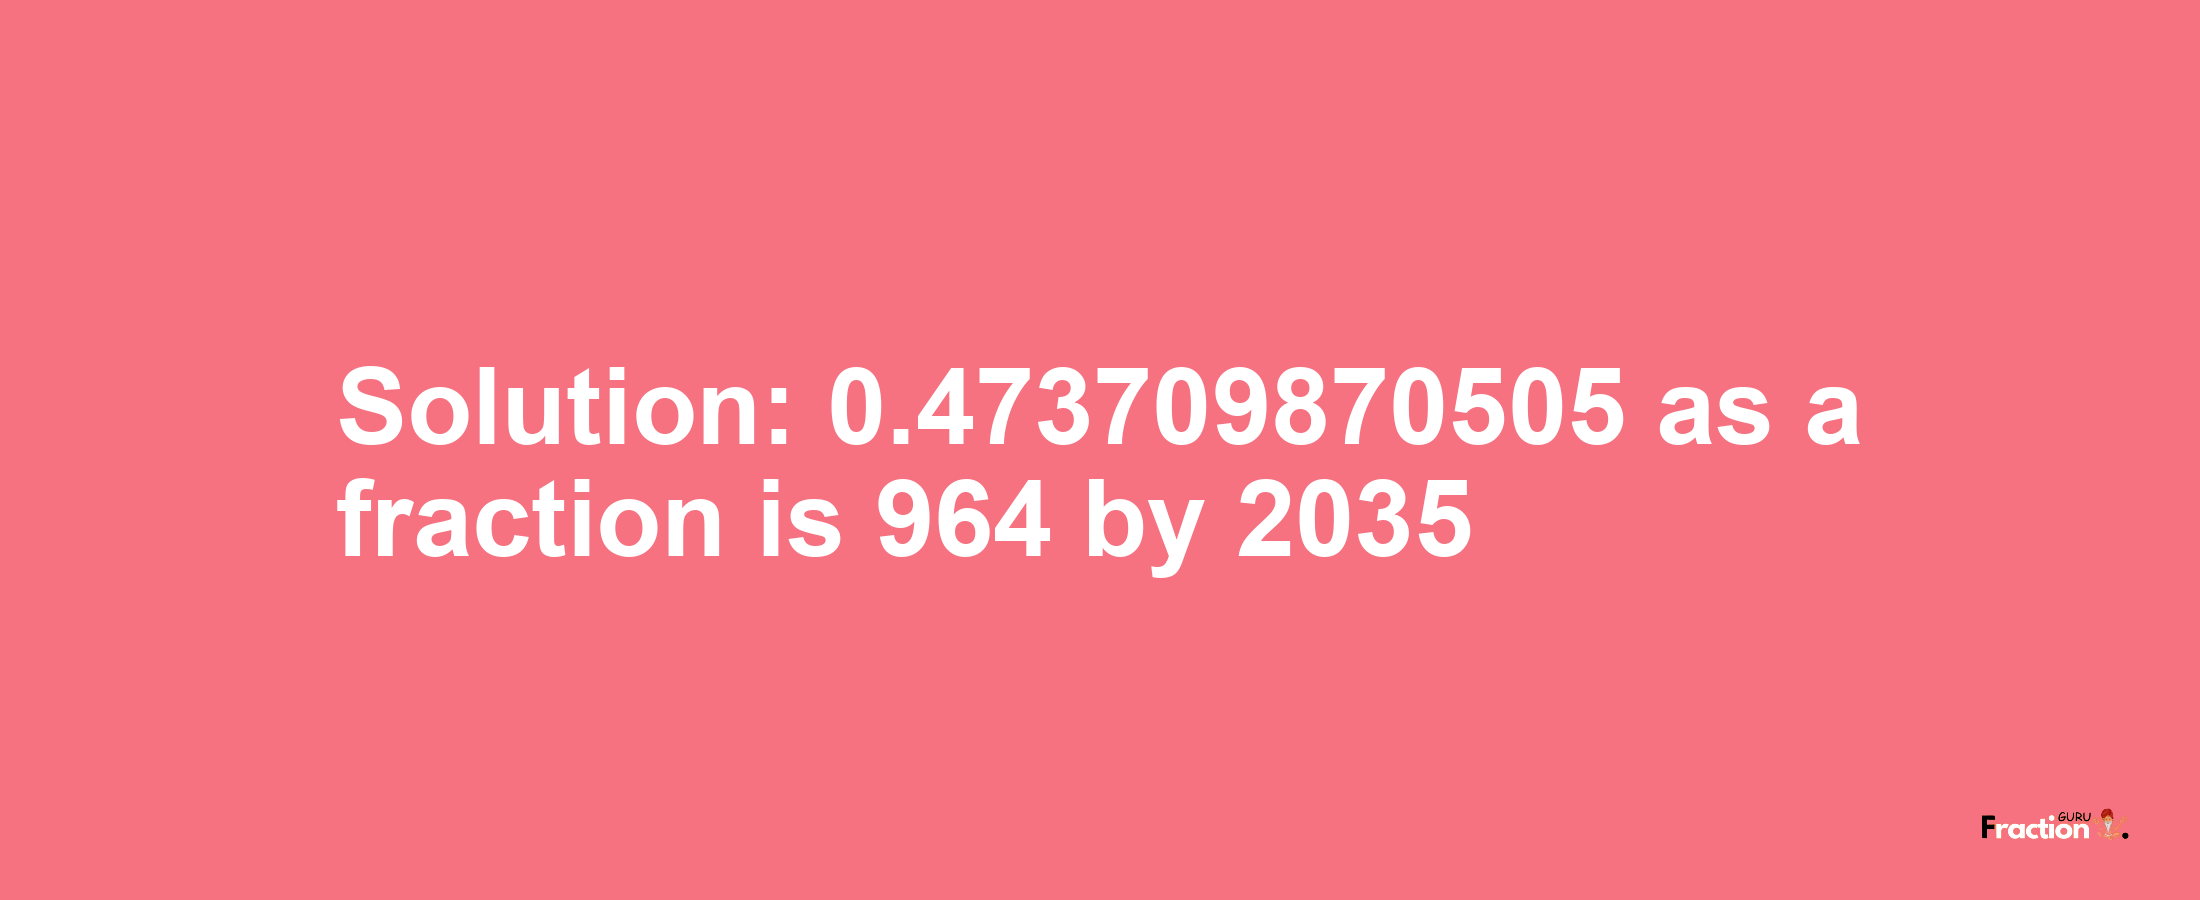 Solution:0.473709870505 as a fraction is 964/2035